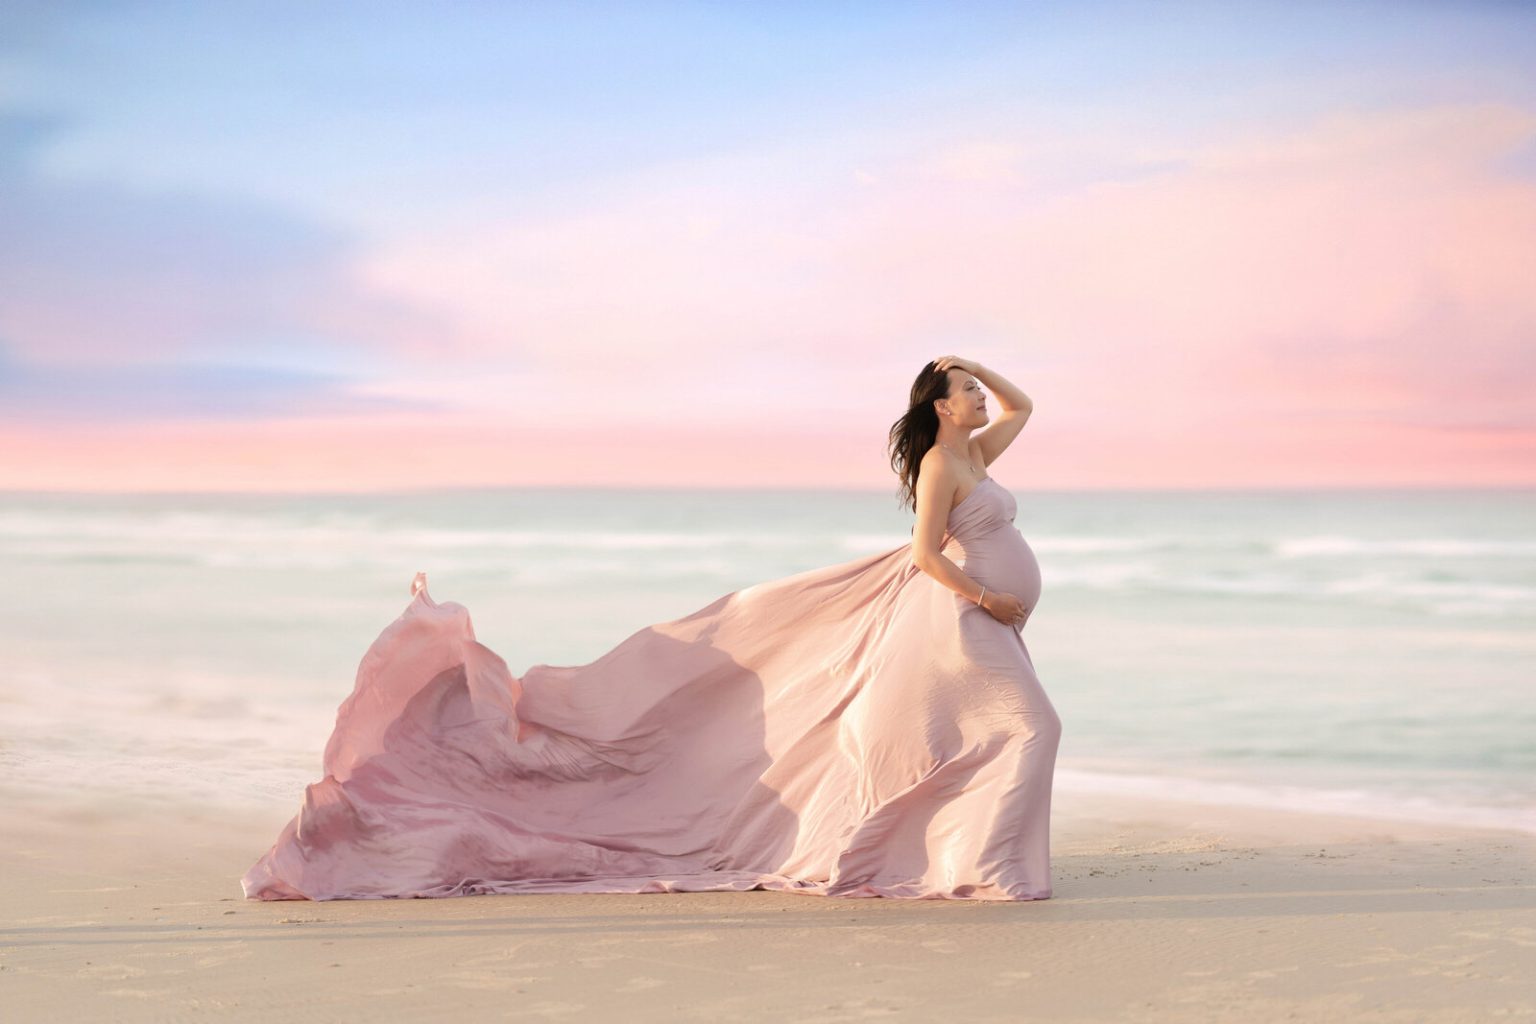 maternity photography for new mom and dad